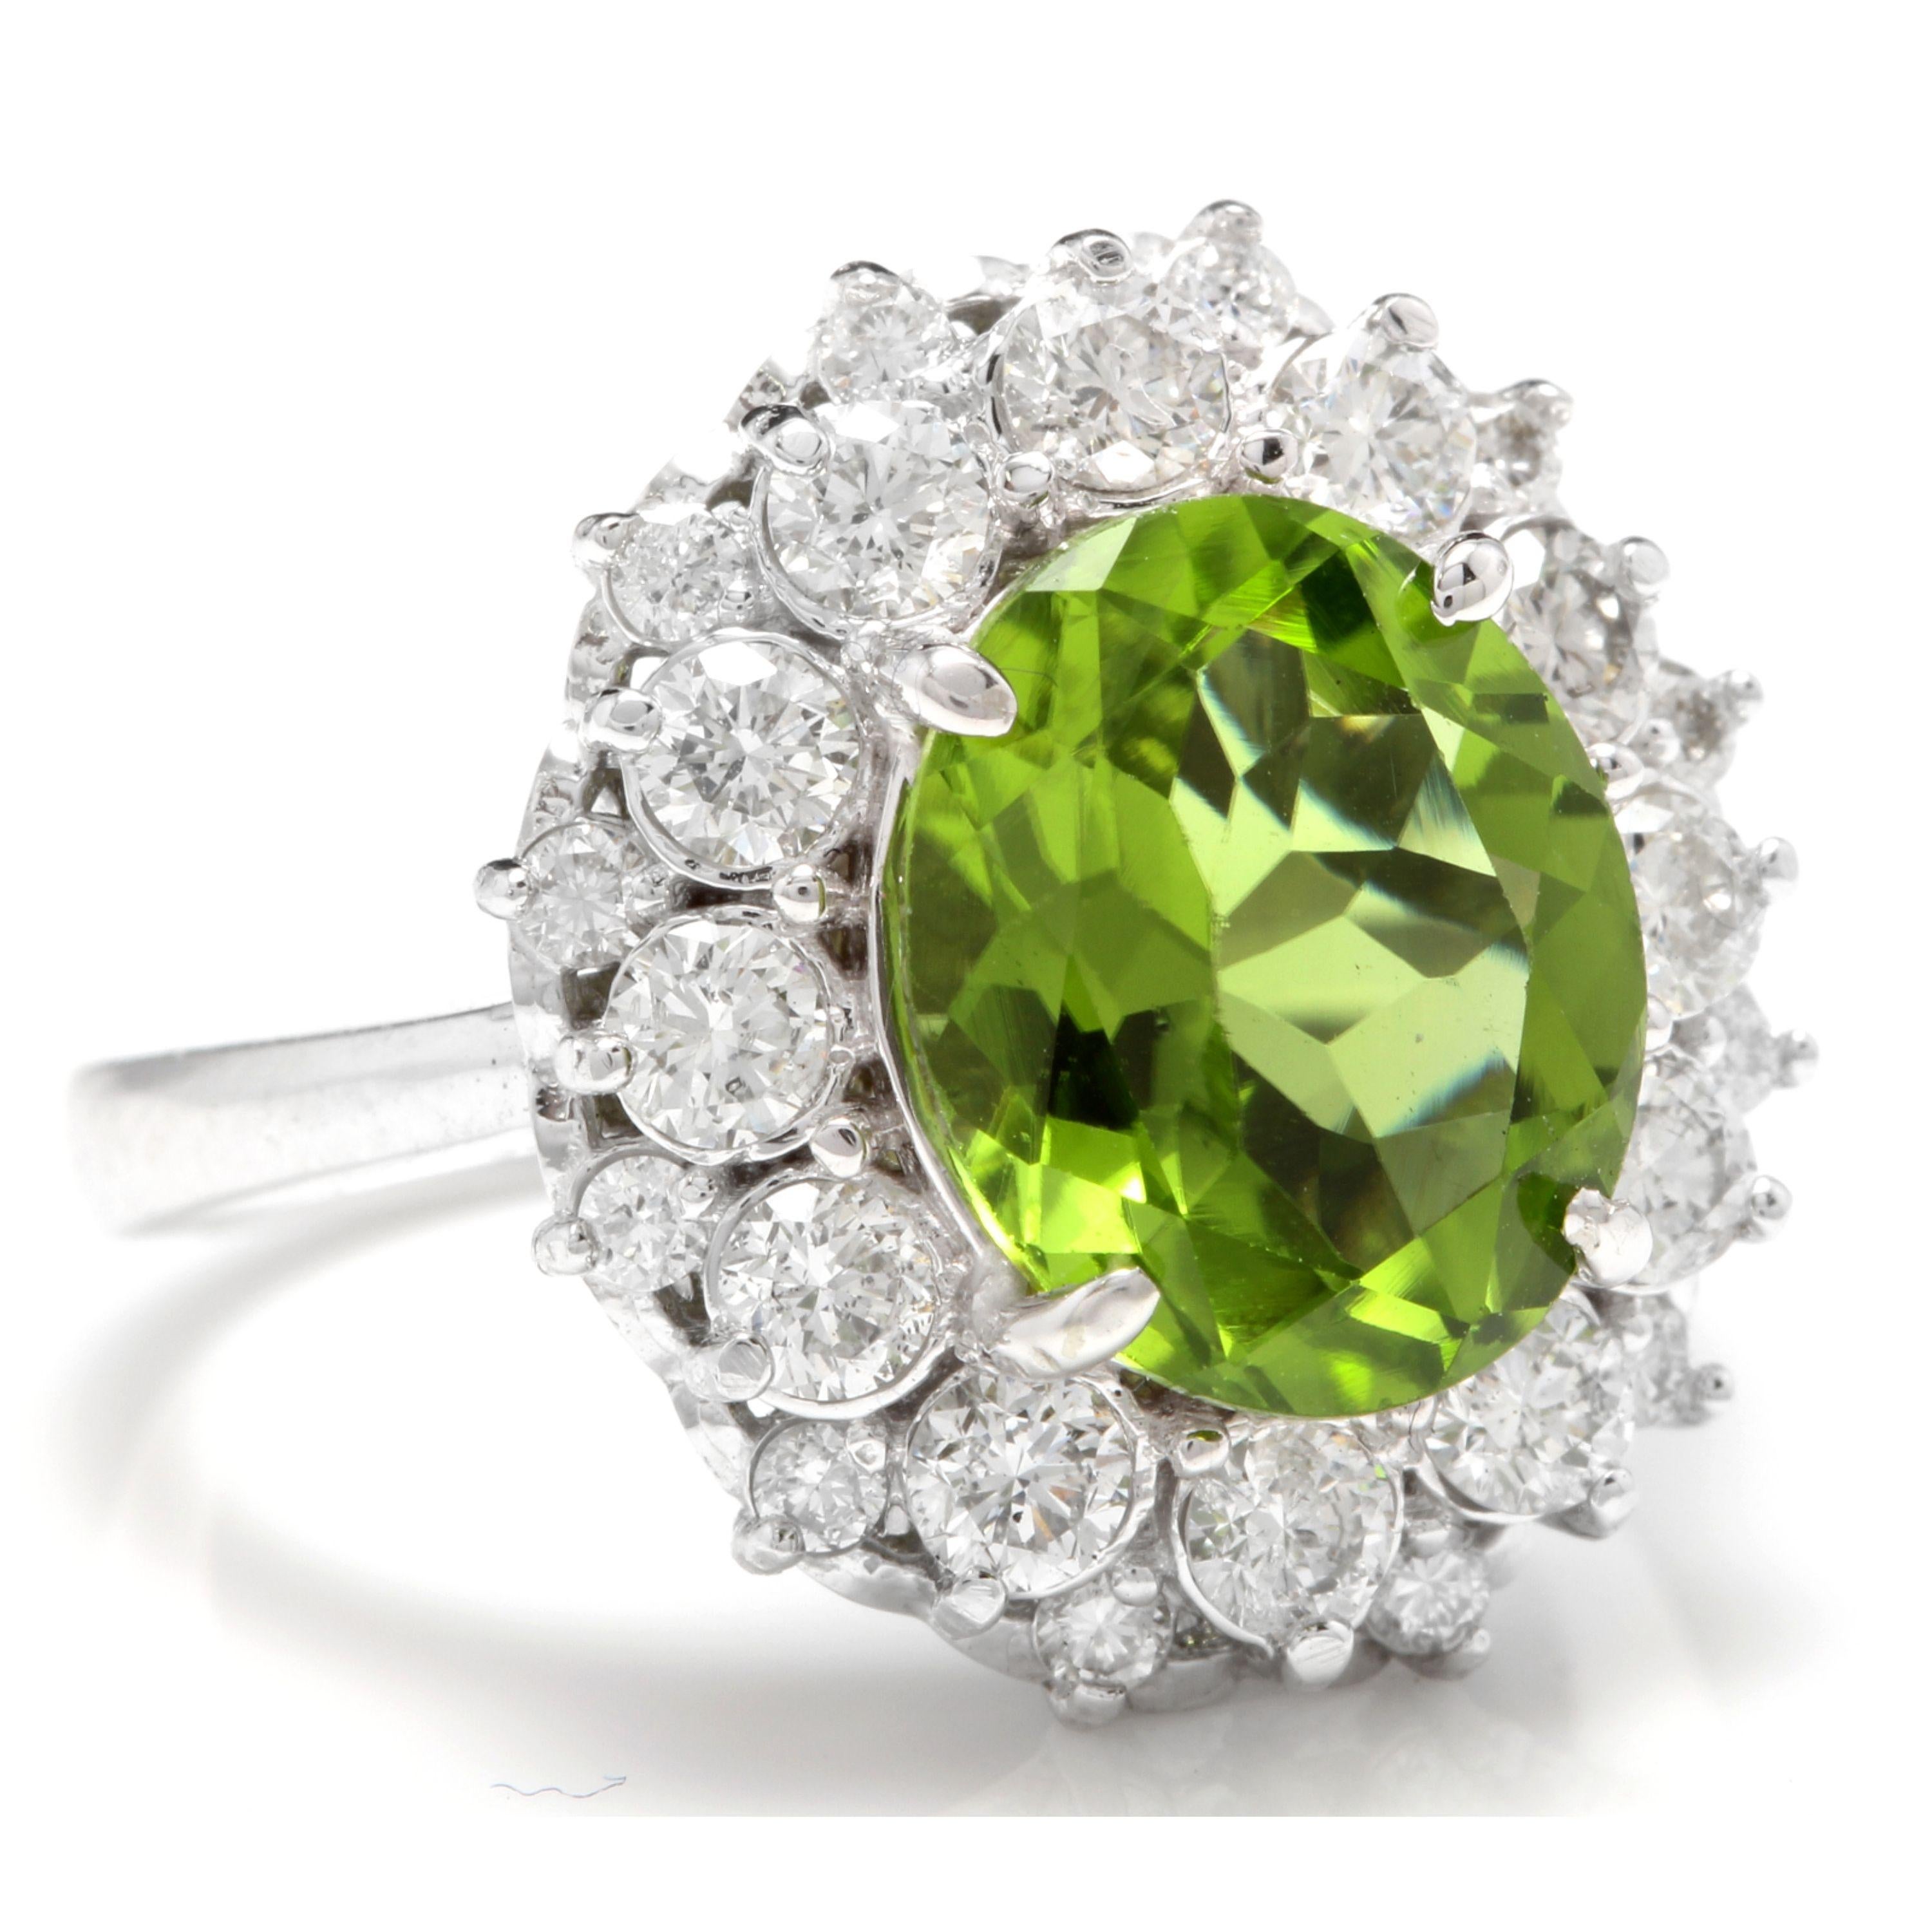 4.85 Carats Natural Very Nice Looking Peridot and Diamond 14K Solid White Gold Ring

Total Natural Oval Peridot Weight is: Approx. 3.50 Carats

Peridot Measures: Approx. 11 x 9mm

Natural Round Diamonds Weight: Approx. 1.35 Carats (color G-H /